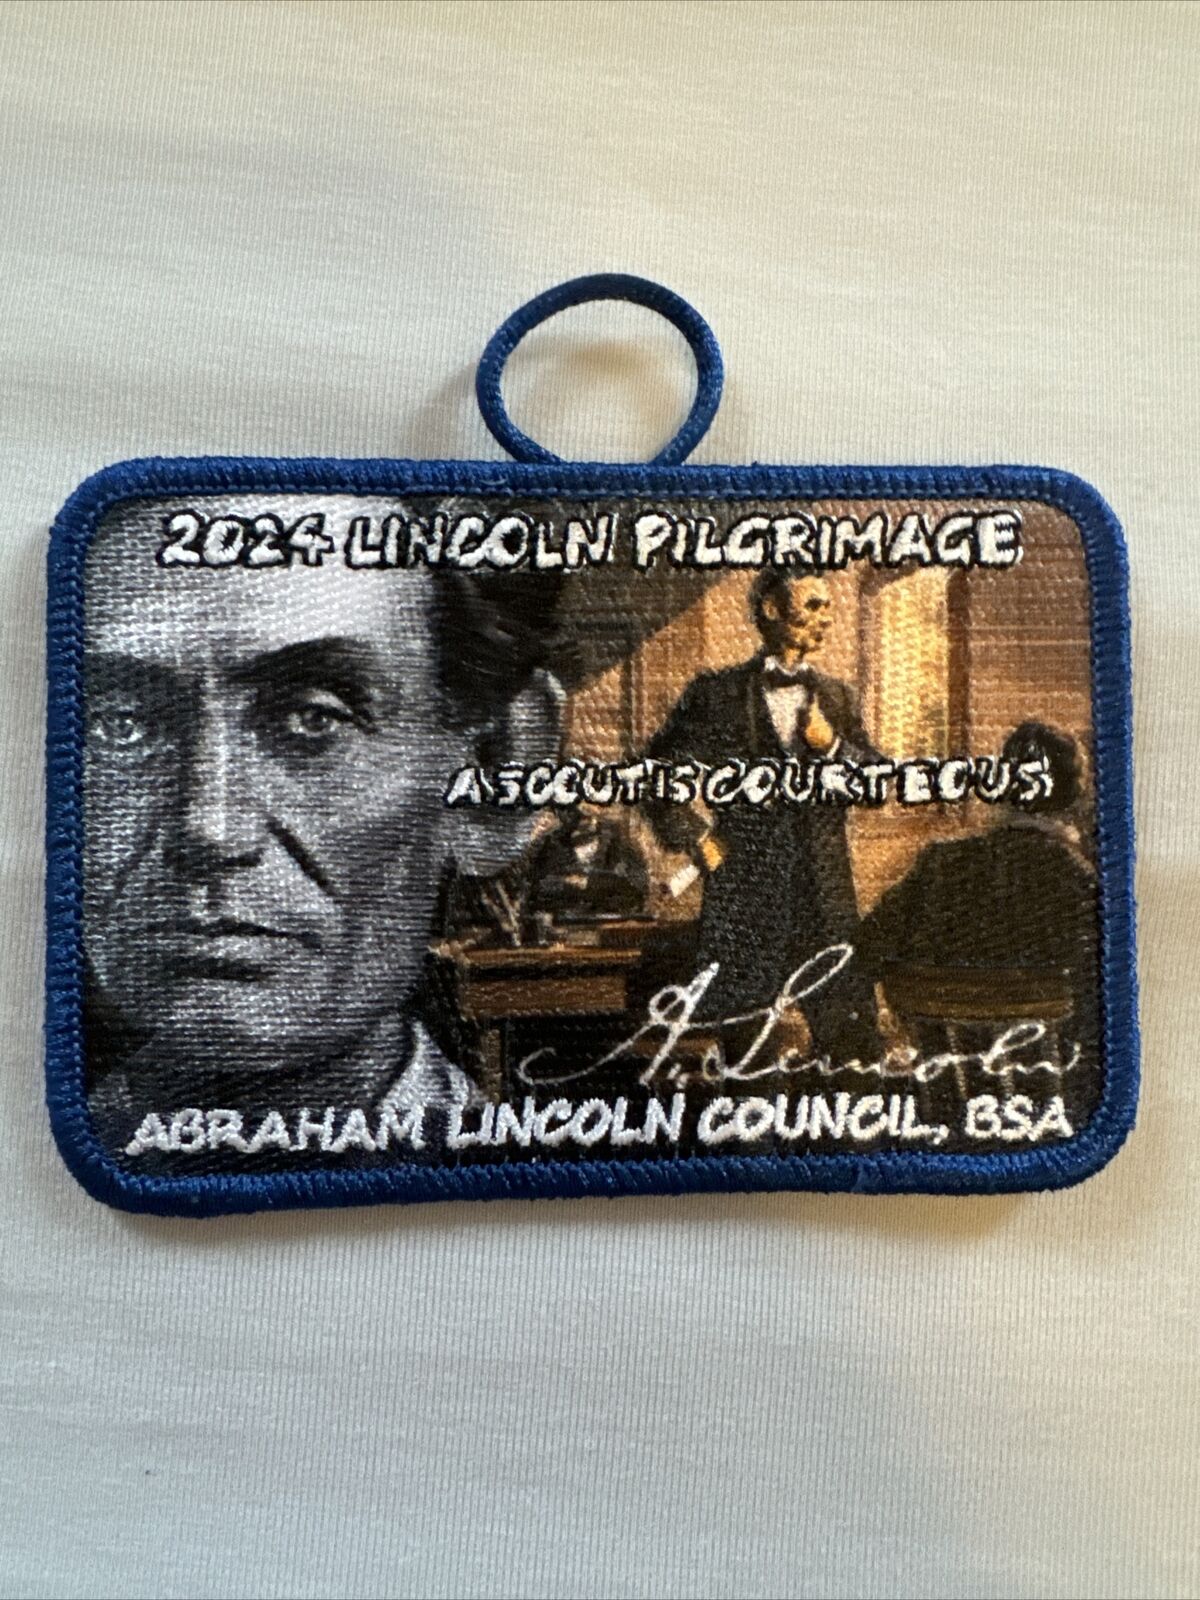 Lincoln pilgrimage Patch 2024